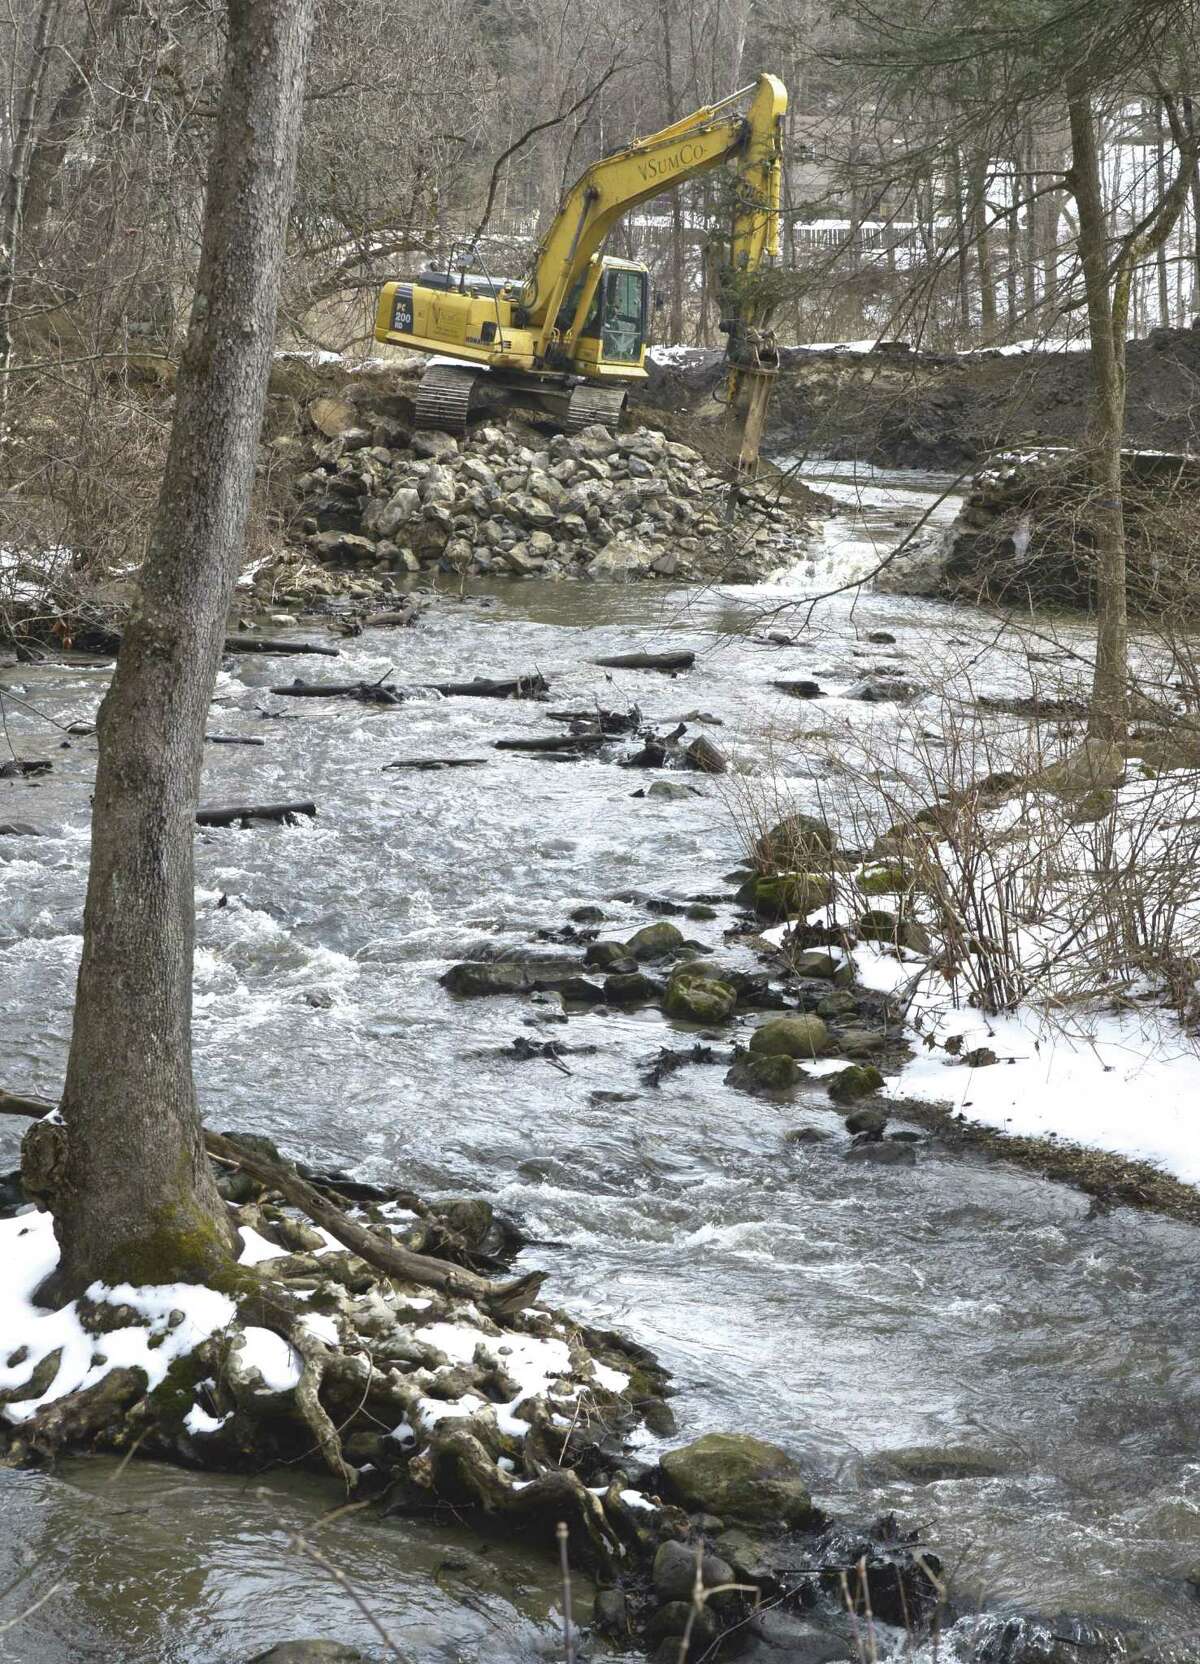 Excavator operator Jarrod Martellacci, works on removing the Old Papermill Dam on the East Aspetuck River on Friday in New Milford. The dam belongs to the Ousatonic Fish & Game Protection Association and its removal is being overseen by the Nature Conservancy.